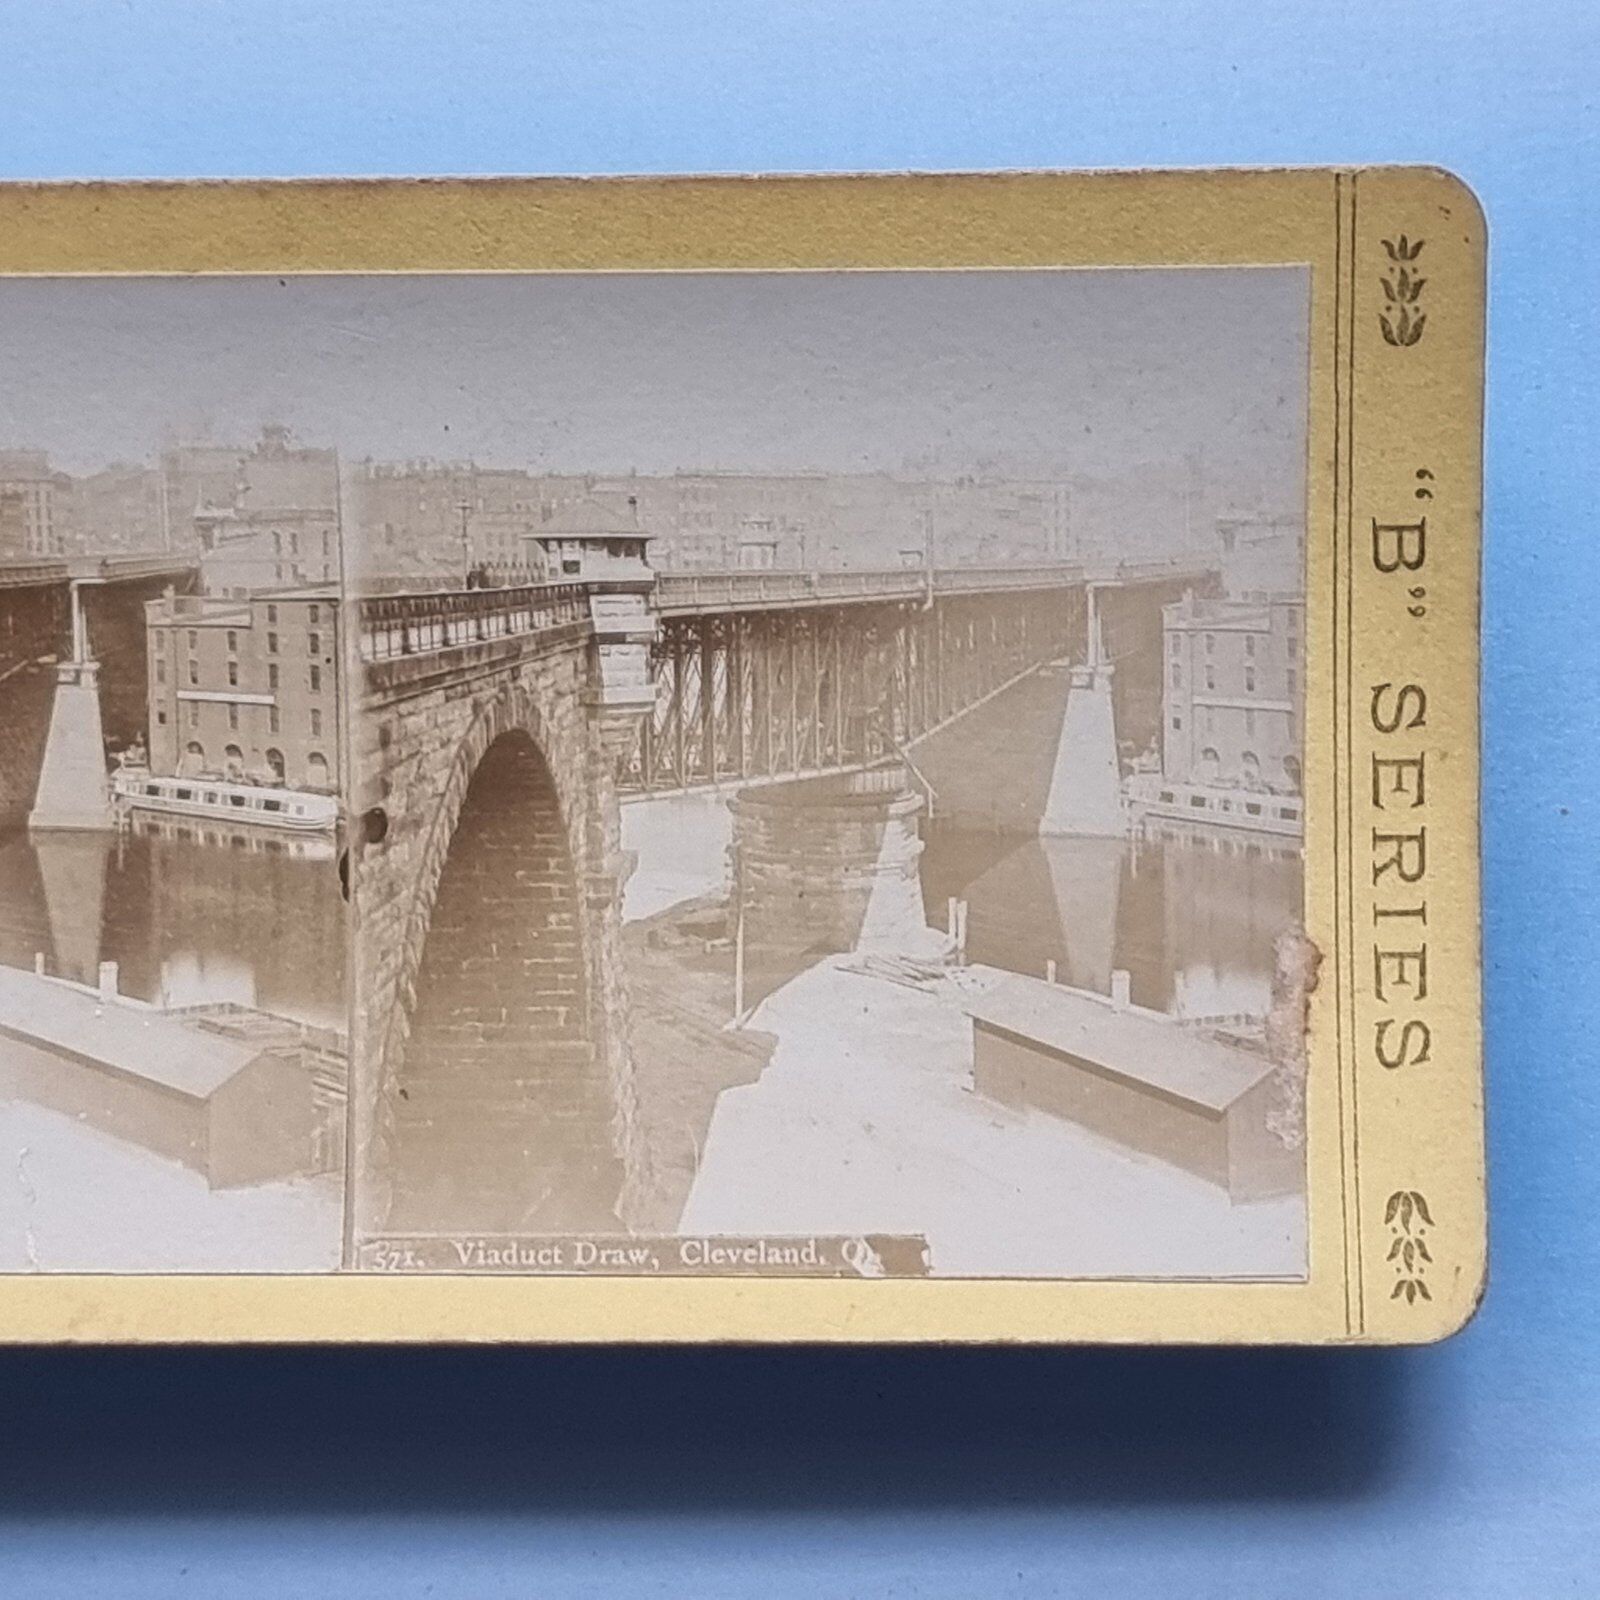 Stereoview Card 3D Real Photo C1900 Cleveland OH USA Lost Viaduct Draw Bridge